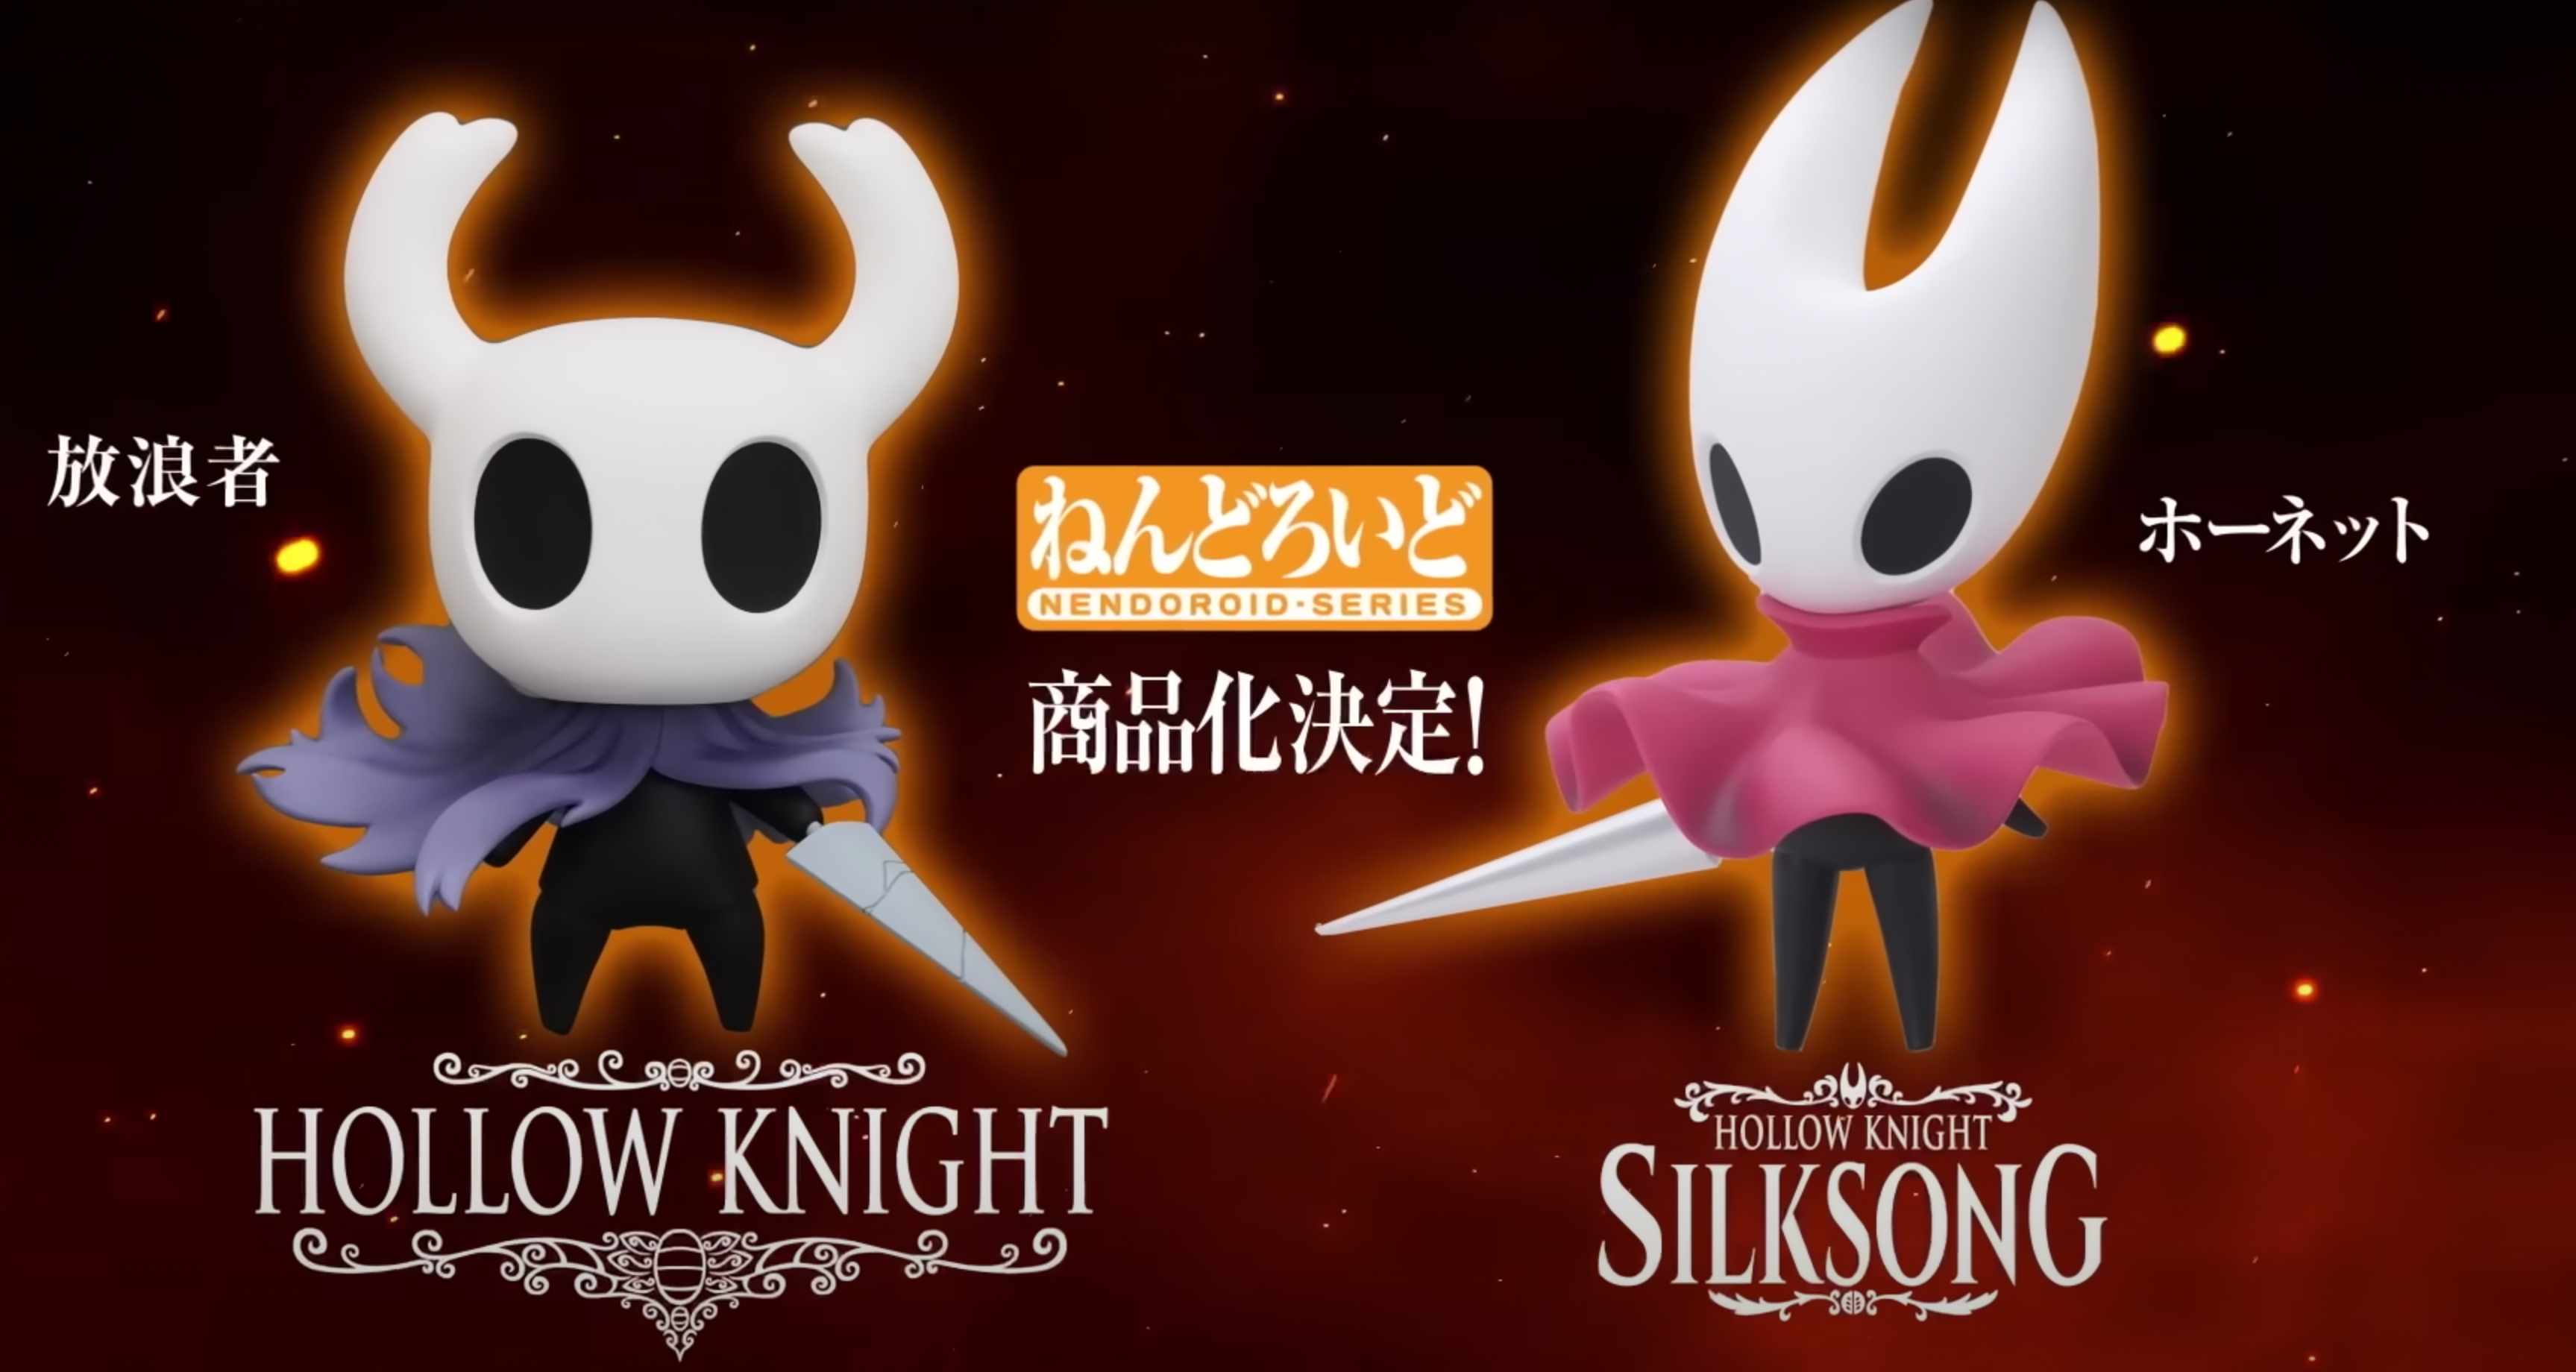 Ease the wait for Silksong with these lovely Hollow Knight statues